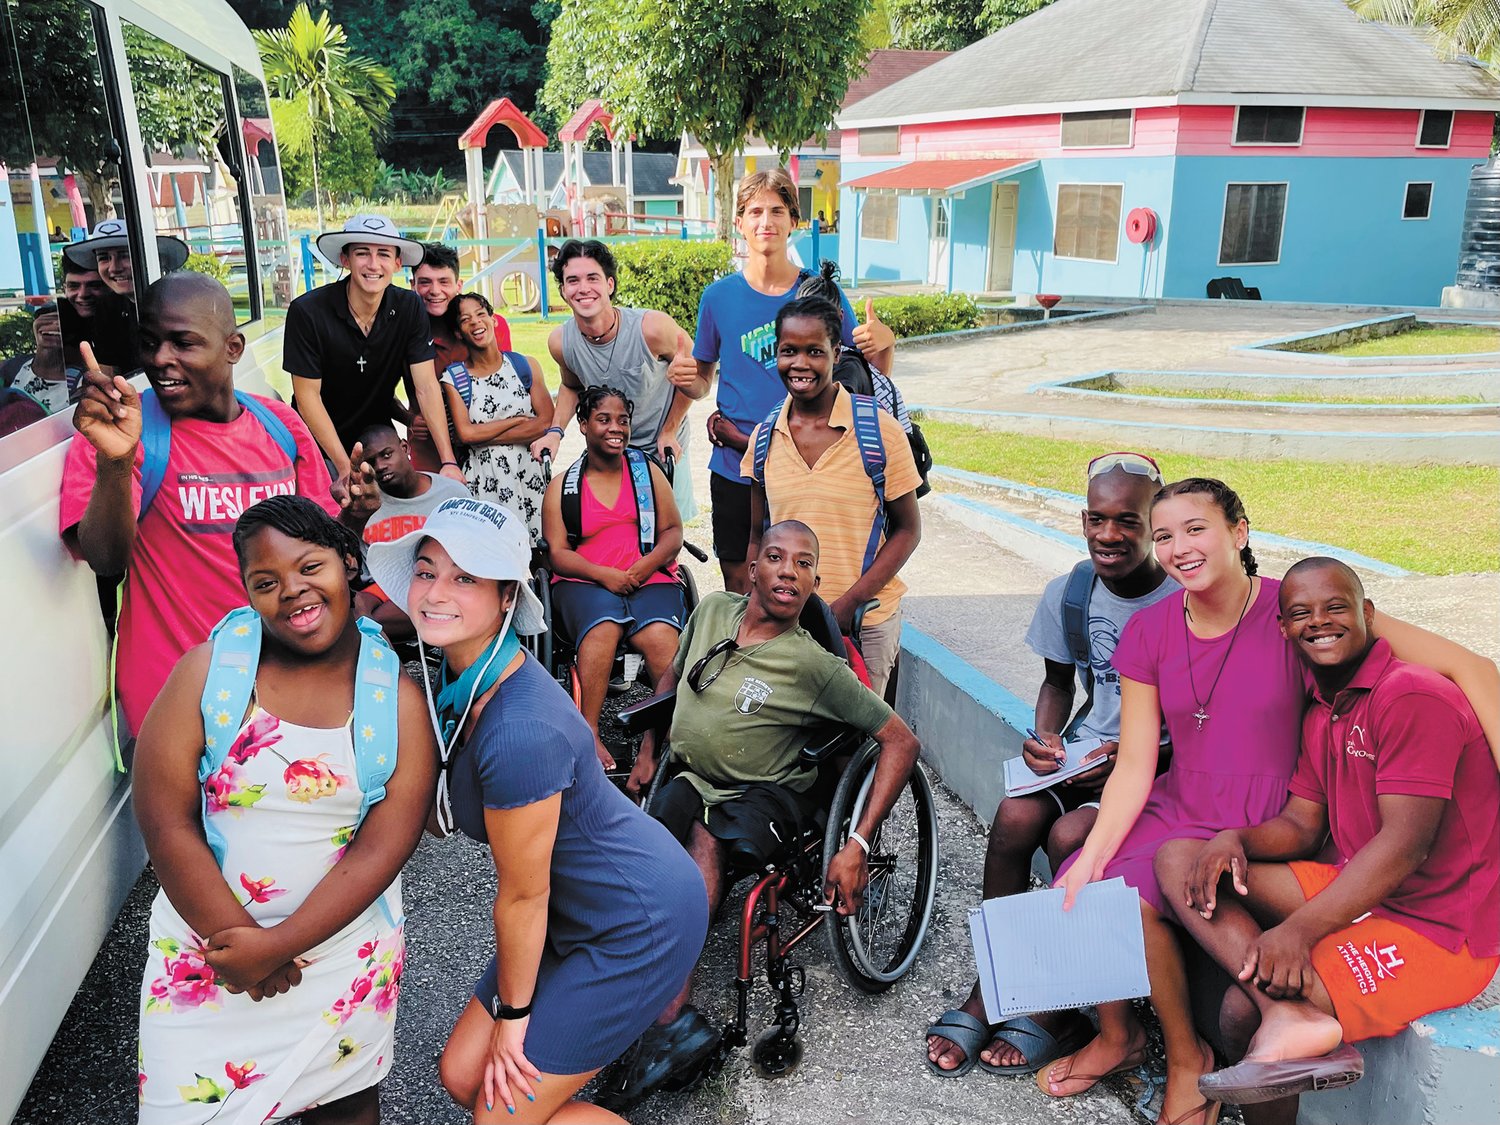 MONTEGO BAY, JAMAICA: Seven youth from Holy Apostles Church and seven adults from the church went to Montego Bay from Aug. 6 to Aug. 13 for an eight-day mission trip at Blessed Assurance. (Submitted photo)